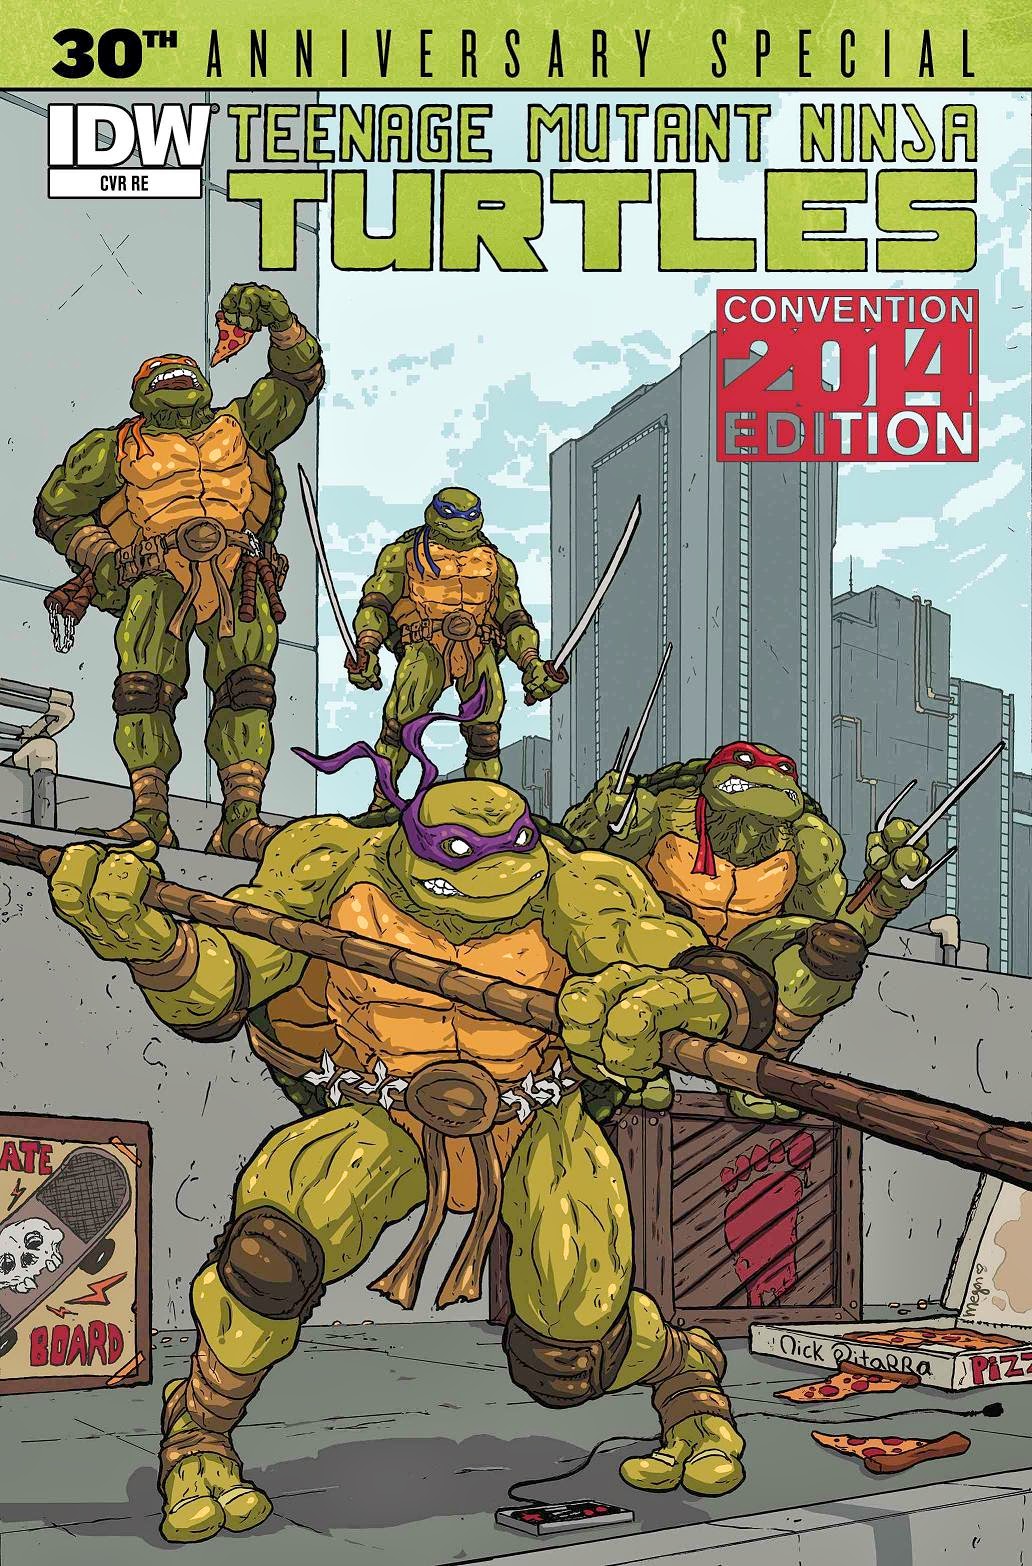 San Diego Comic-Con 2014 Exclusive Teenage Mutant Ninja Turtles 30th Anniversary Special Variant Cover by Nick Pitarra